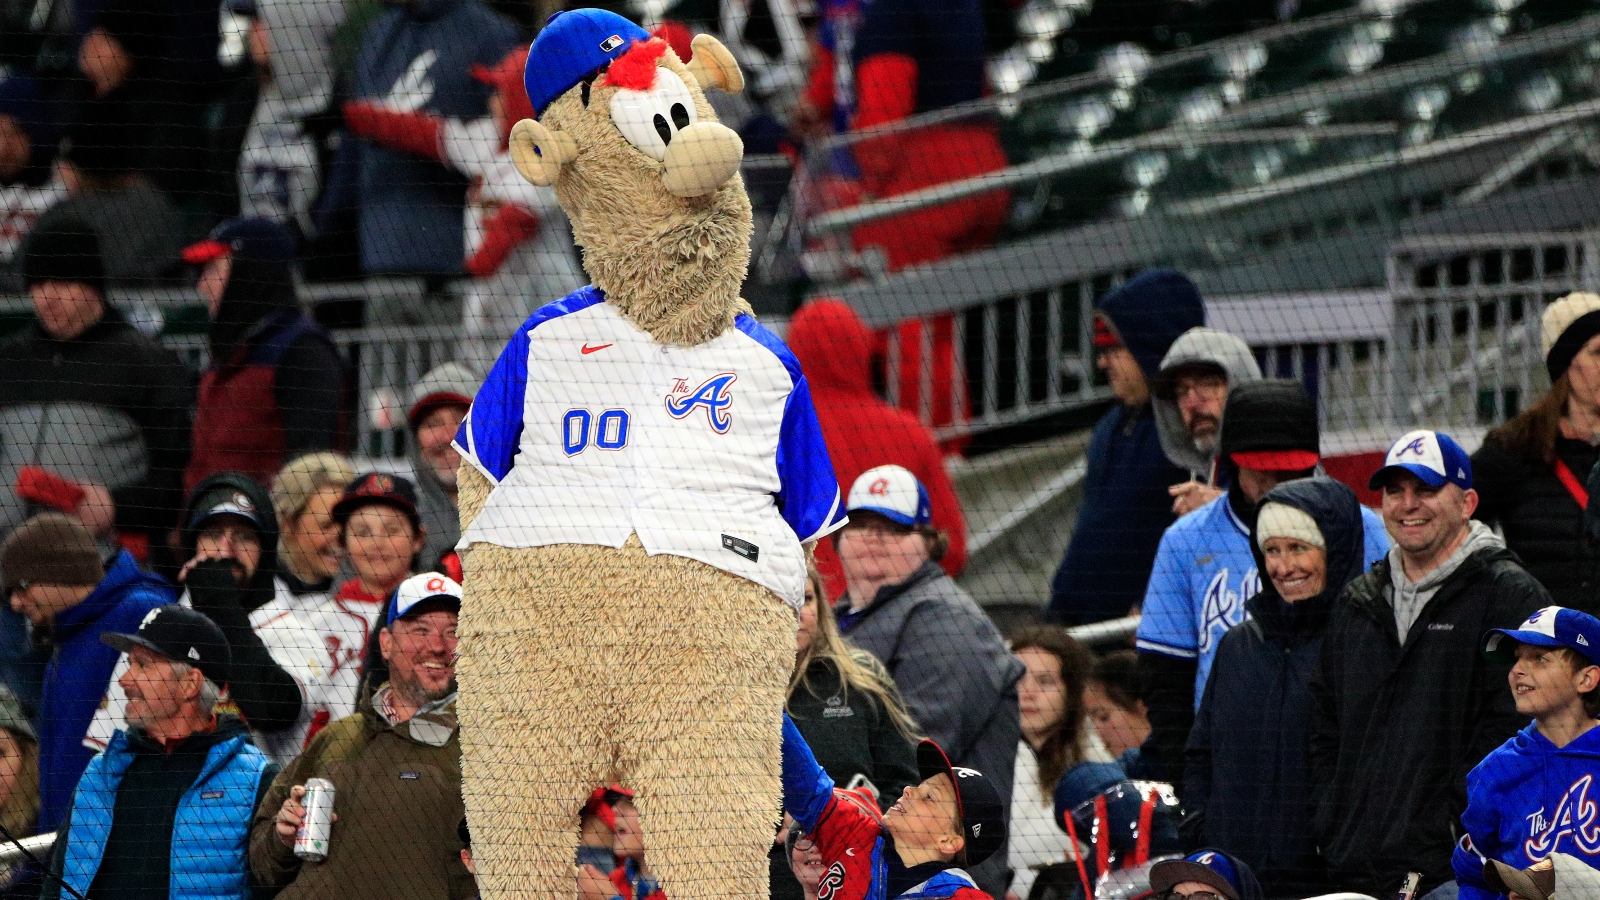 Braves mascot Blooper parades around before the Friday evening MLB News  Photo - Getty Images